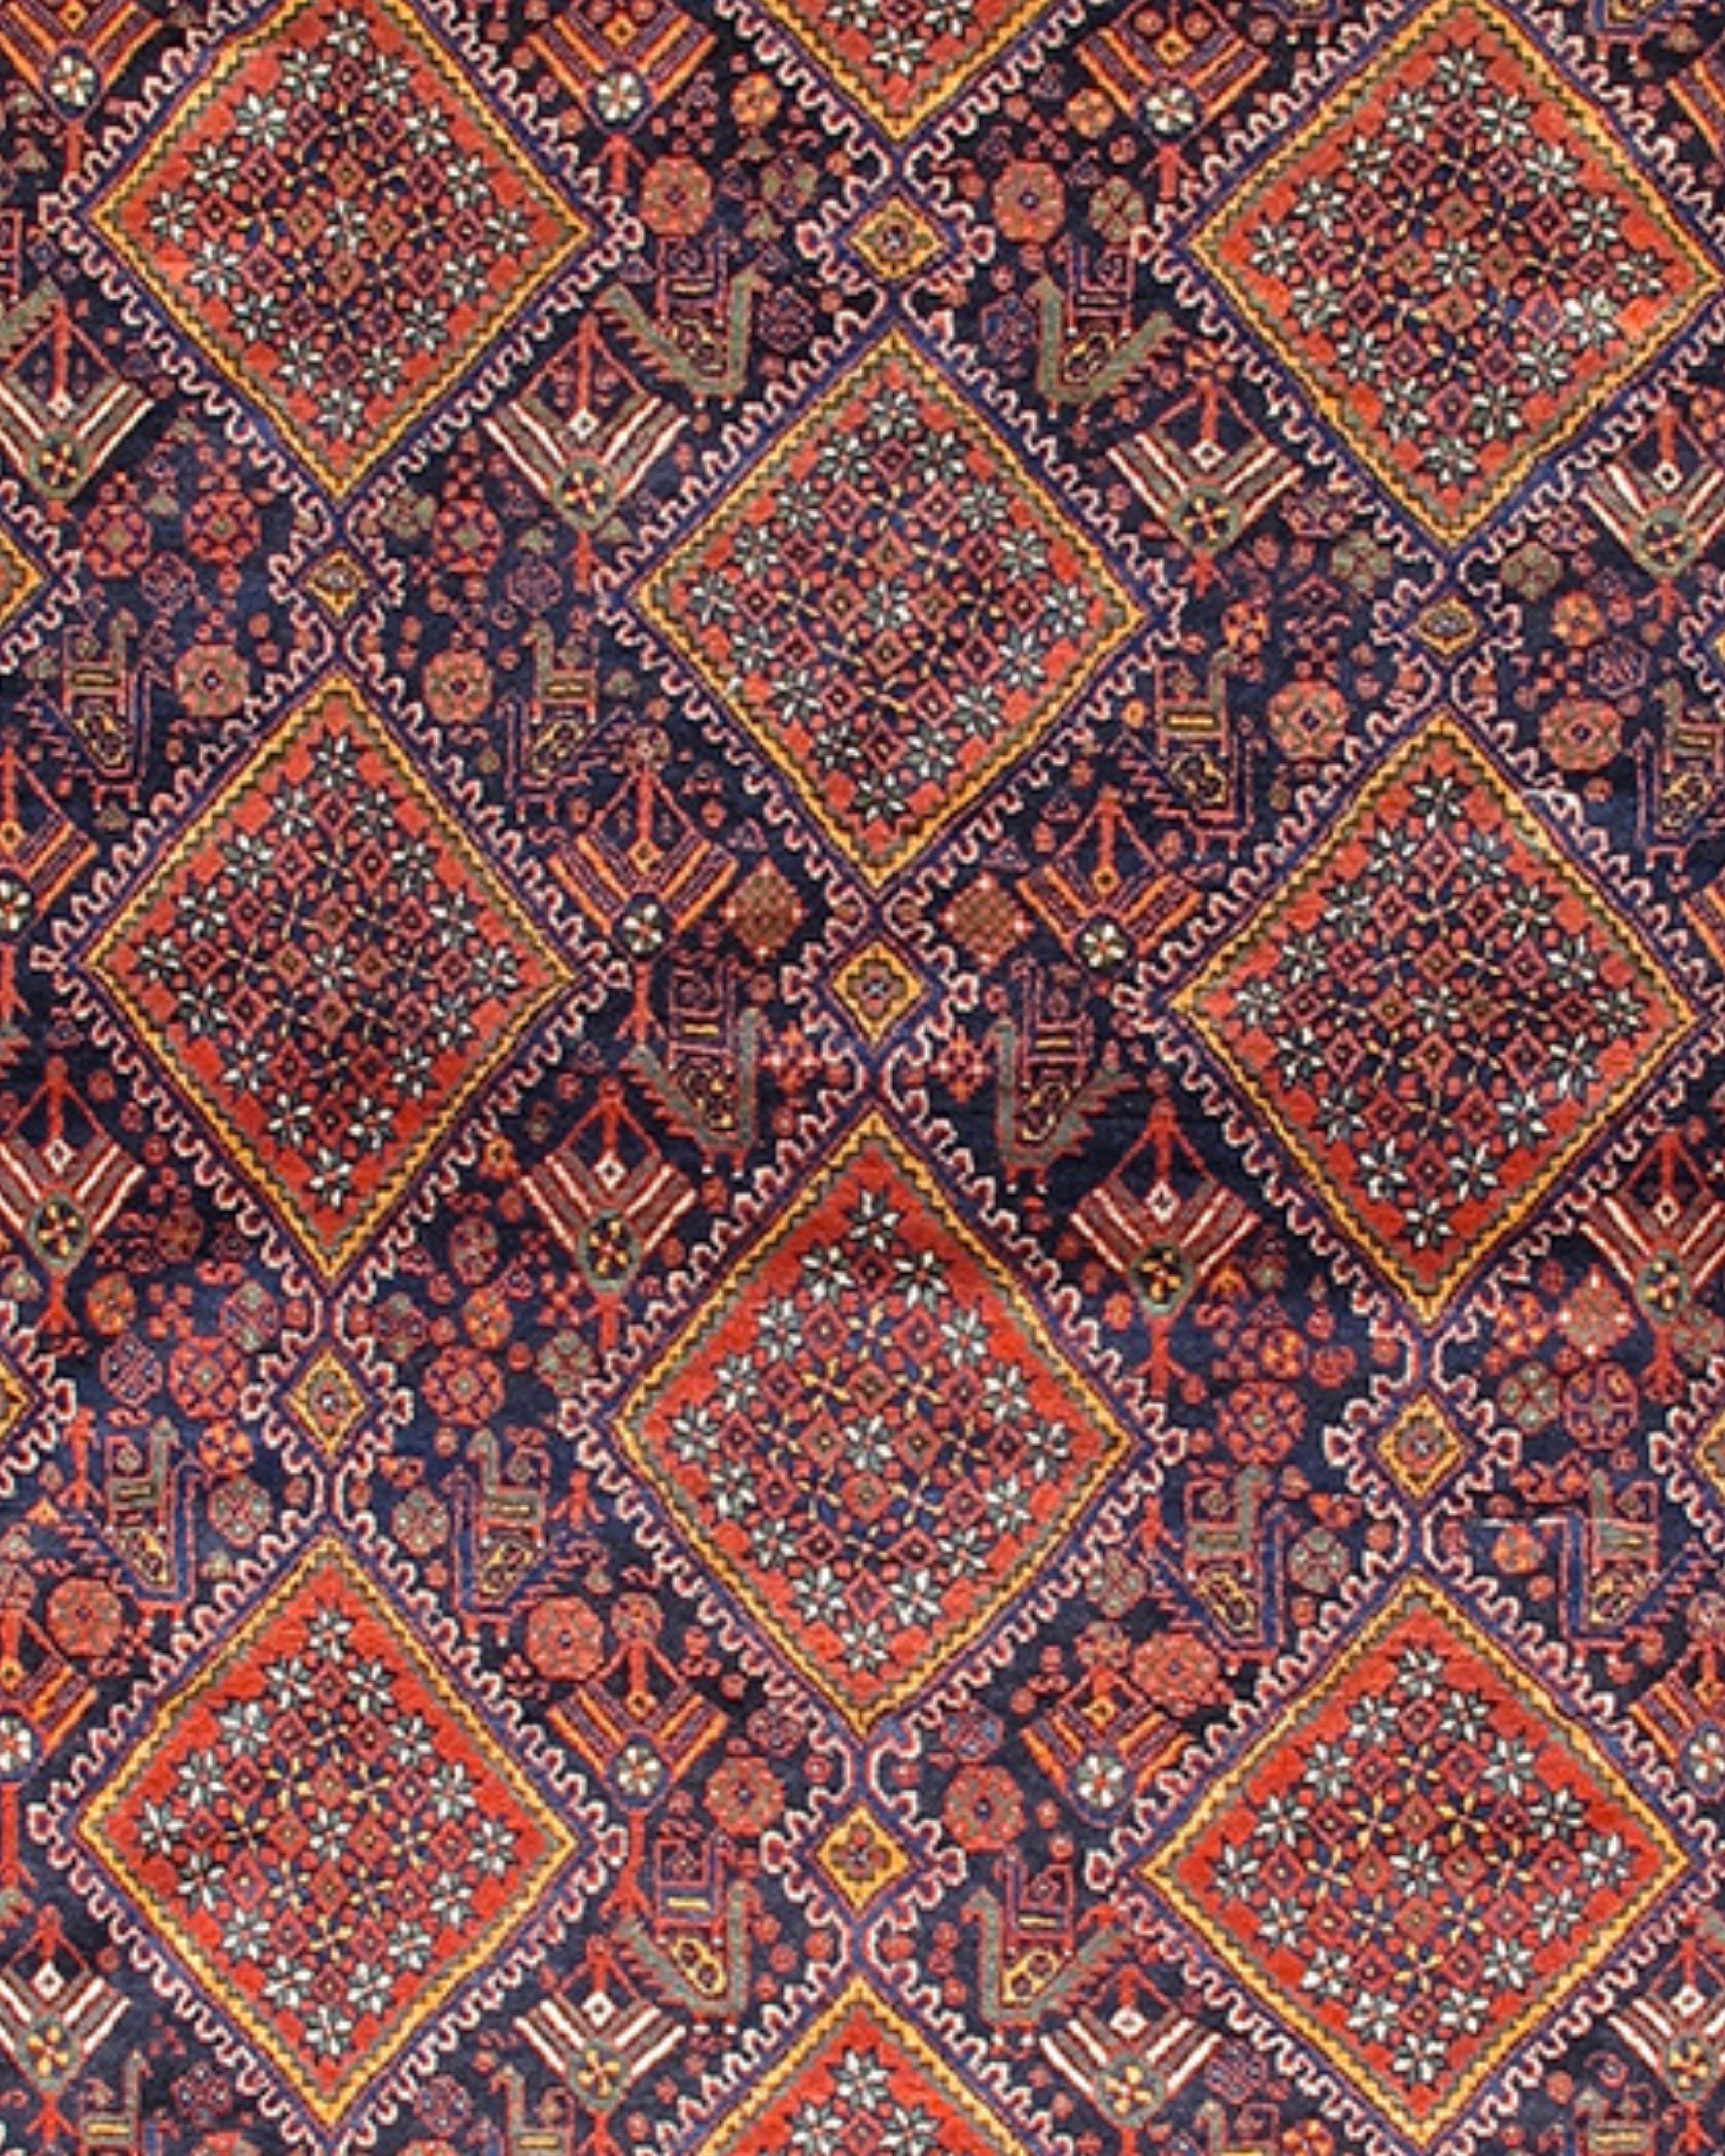 Afshar Rug, Early 20th Century

Additional Information:
Dimensions: 7'5